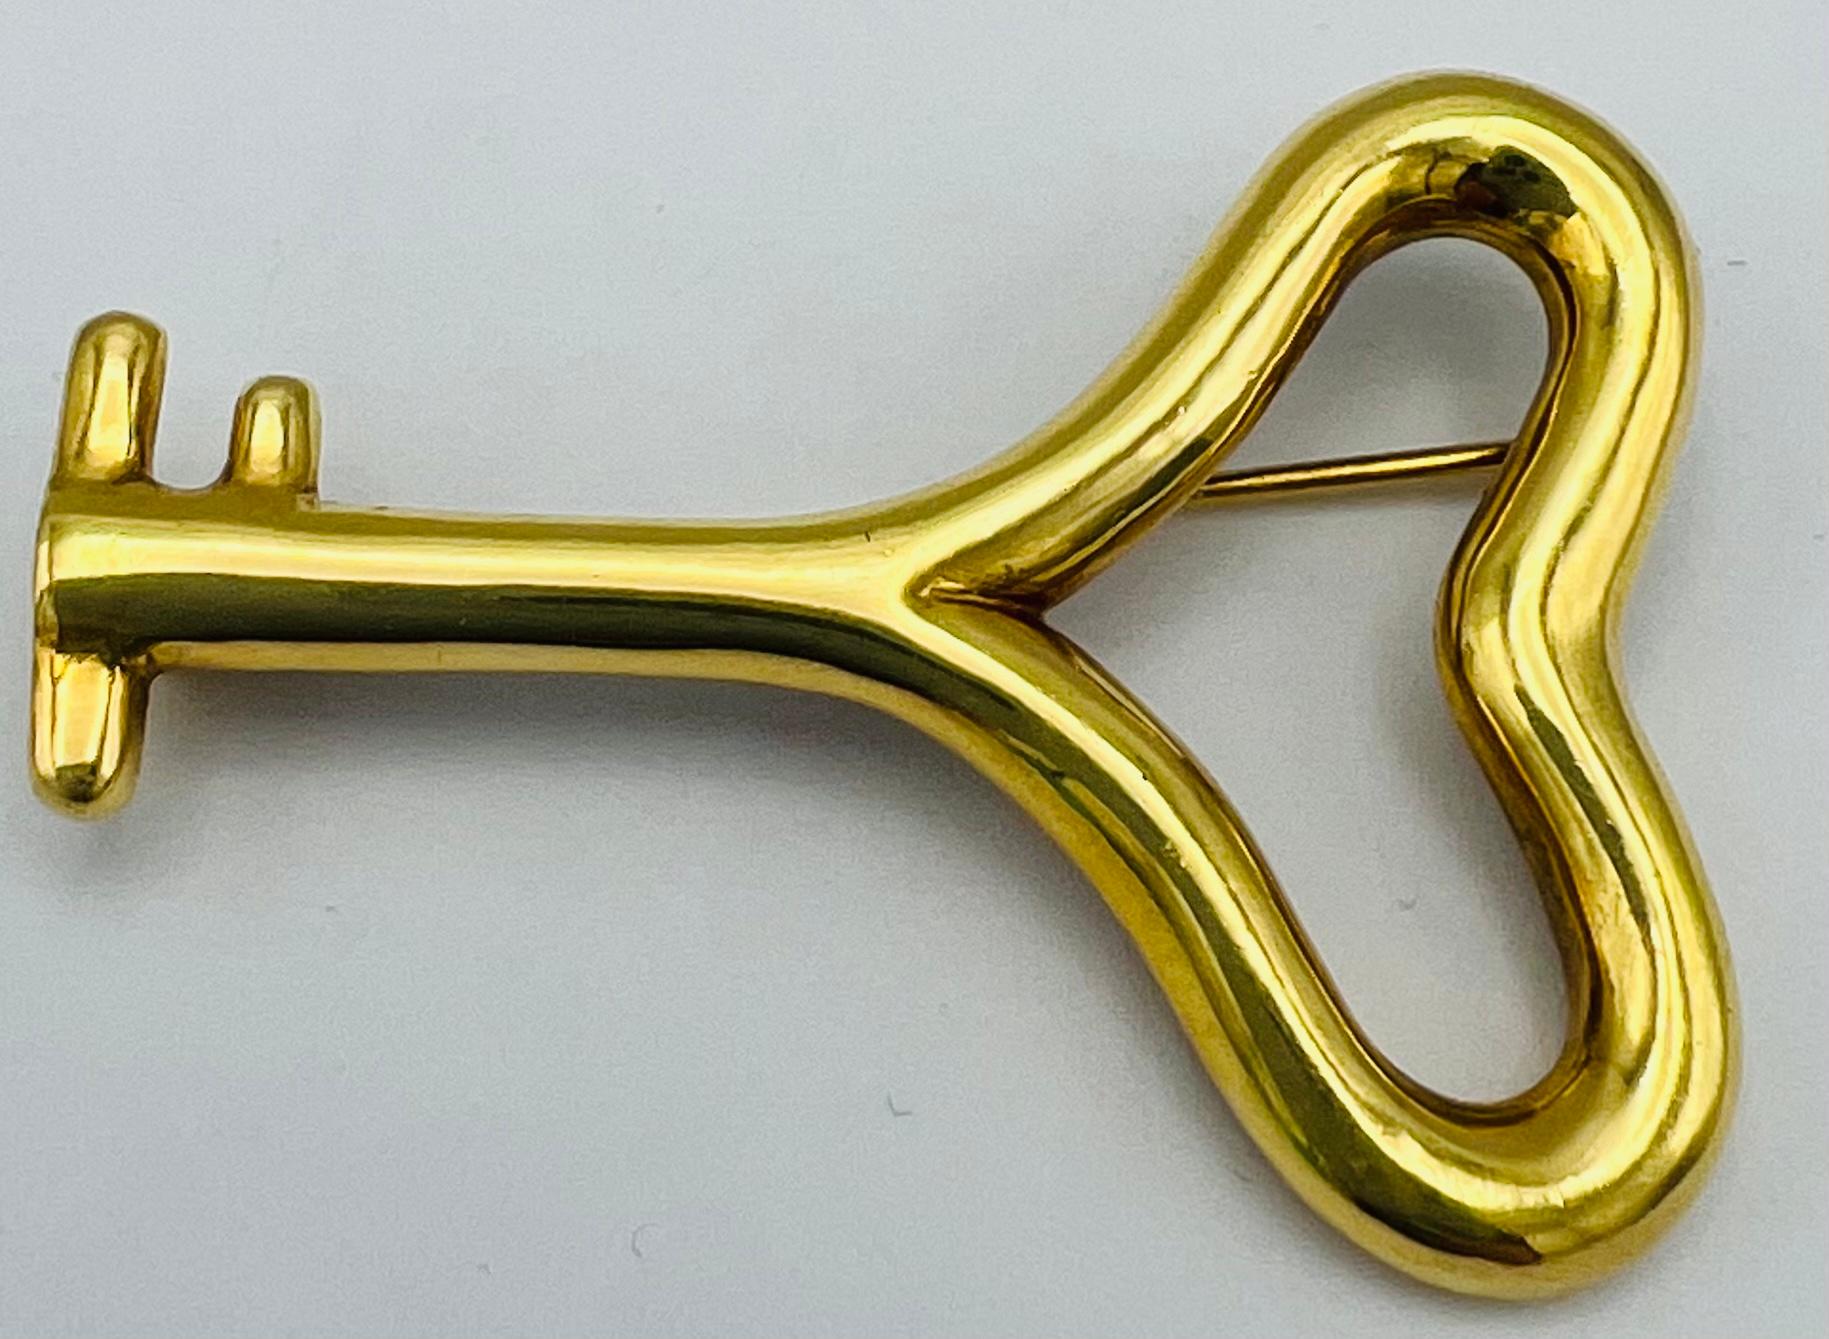 Product details:

The brooch is made out of 18k yellow gold.

Hallmarks: 1993, Cummings, 18K.
Das Gewicht beträgt 12.0 Gramm.
The measurements are 1.75 inches long and 1.25 inches wide.

Note: the brooch can be converted into the pendant upon